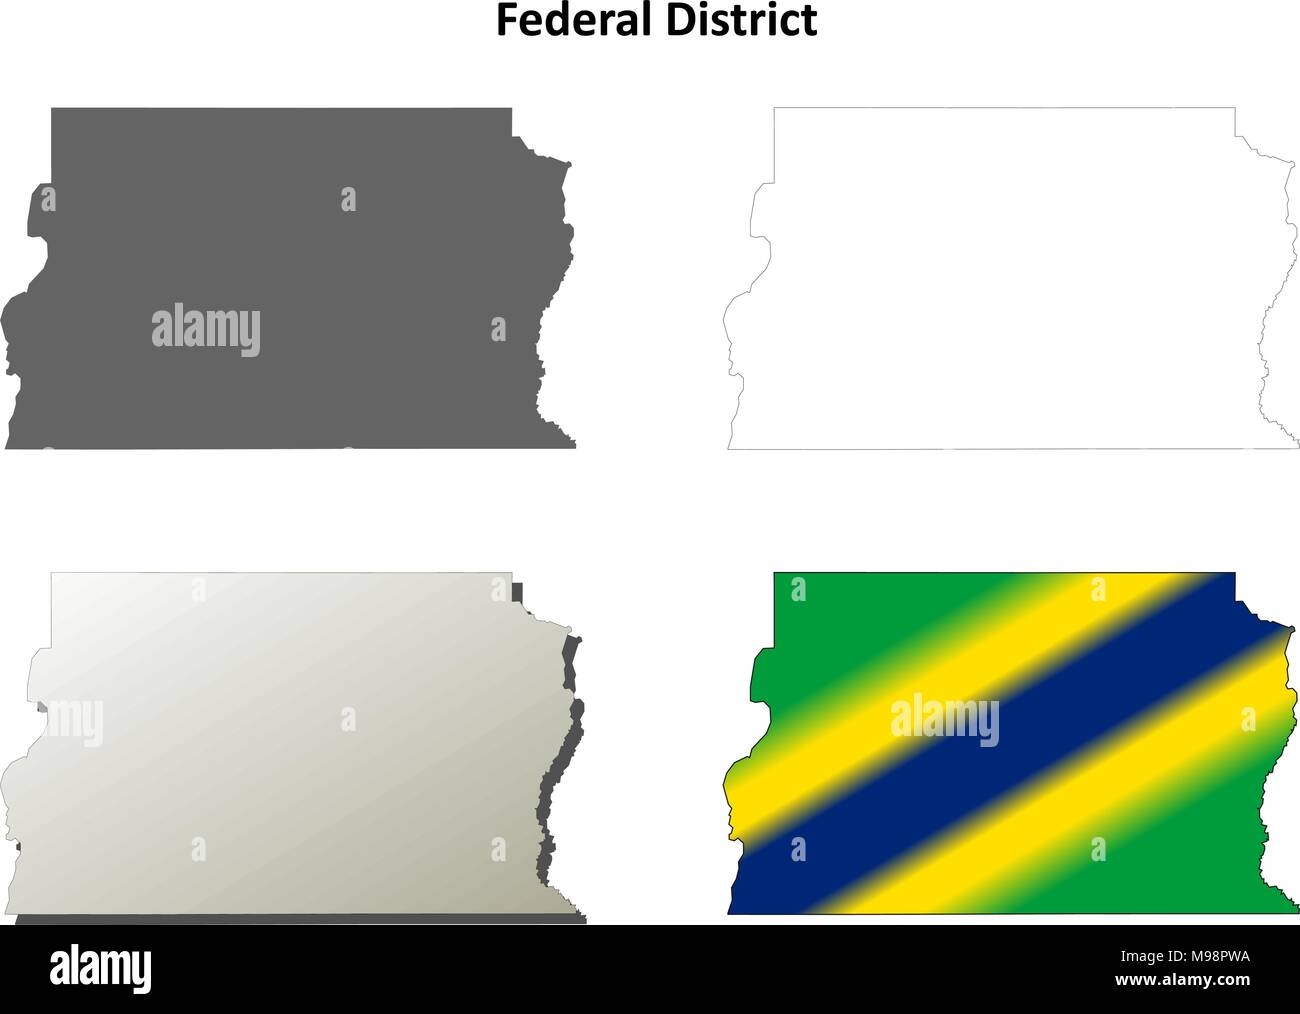 Federal District blank outline map set Stock Vector